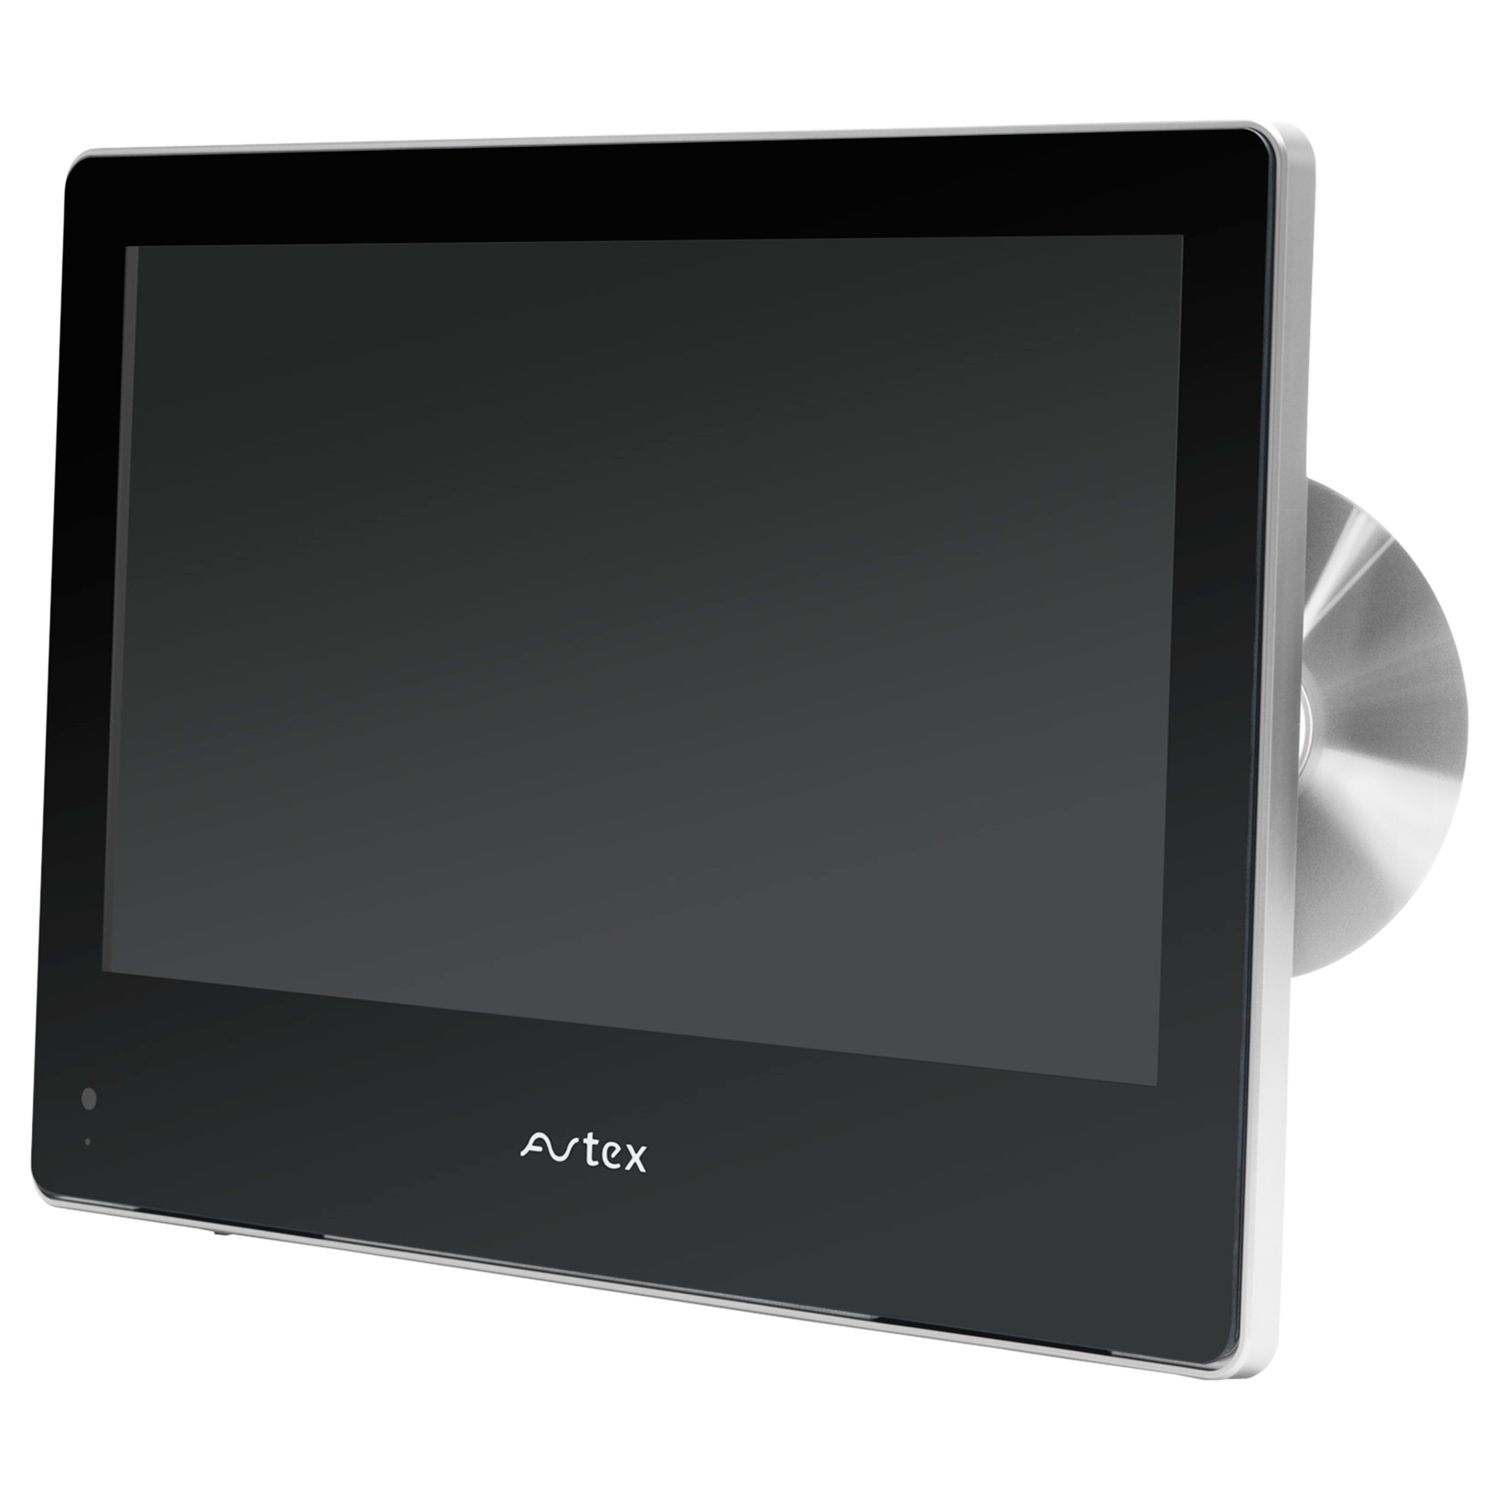 Avtex L165DRS LCD HD 720p TV/DVD Combi, 16&quot; with Freeview/Analogue Tuner at John Lewis & Partners